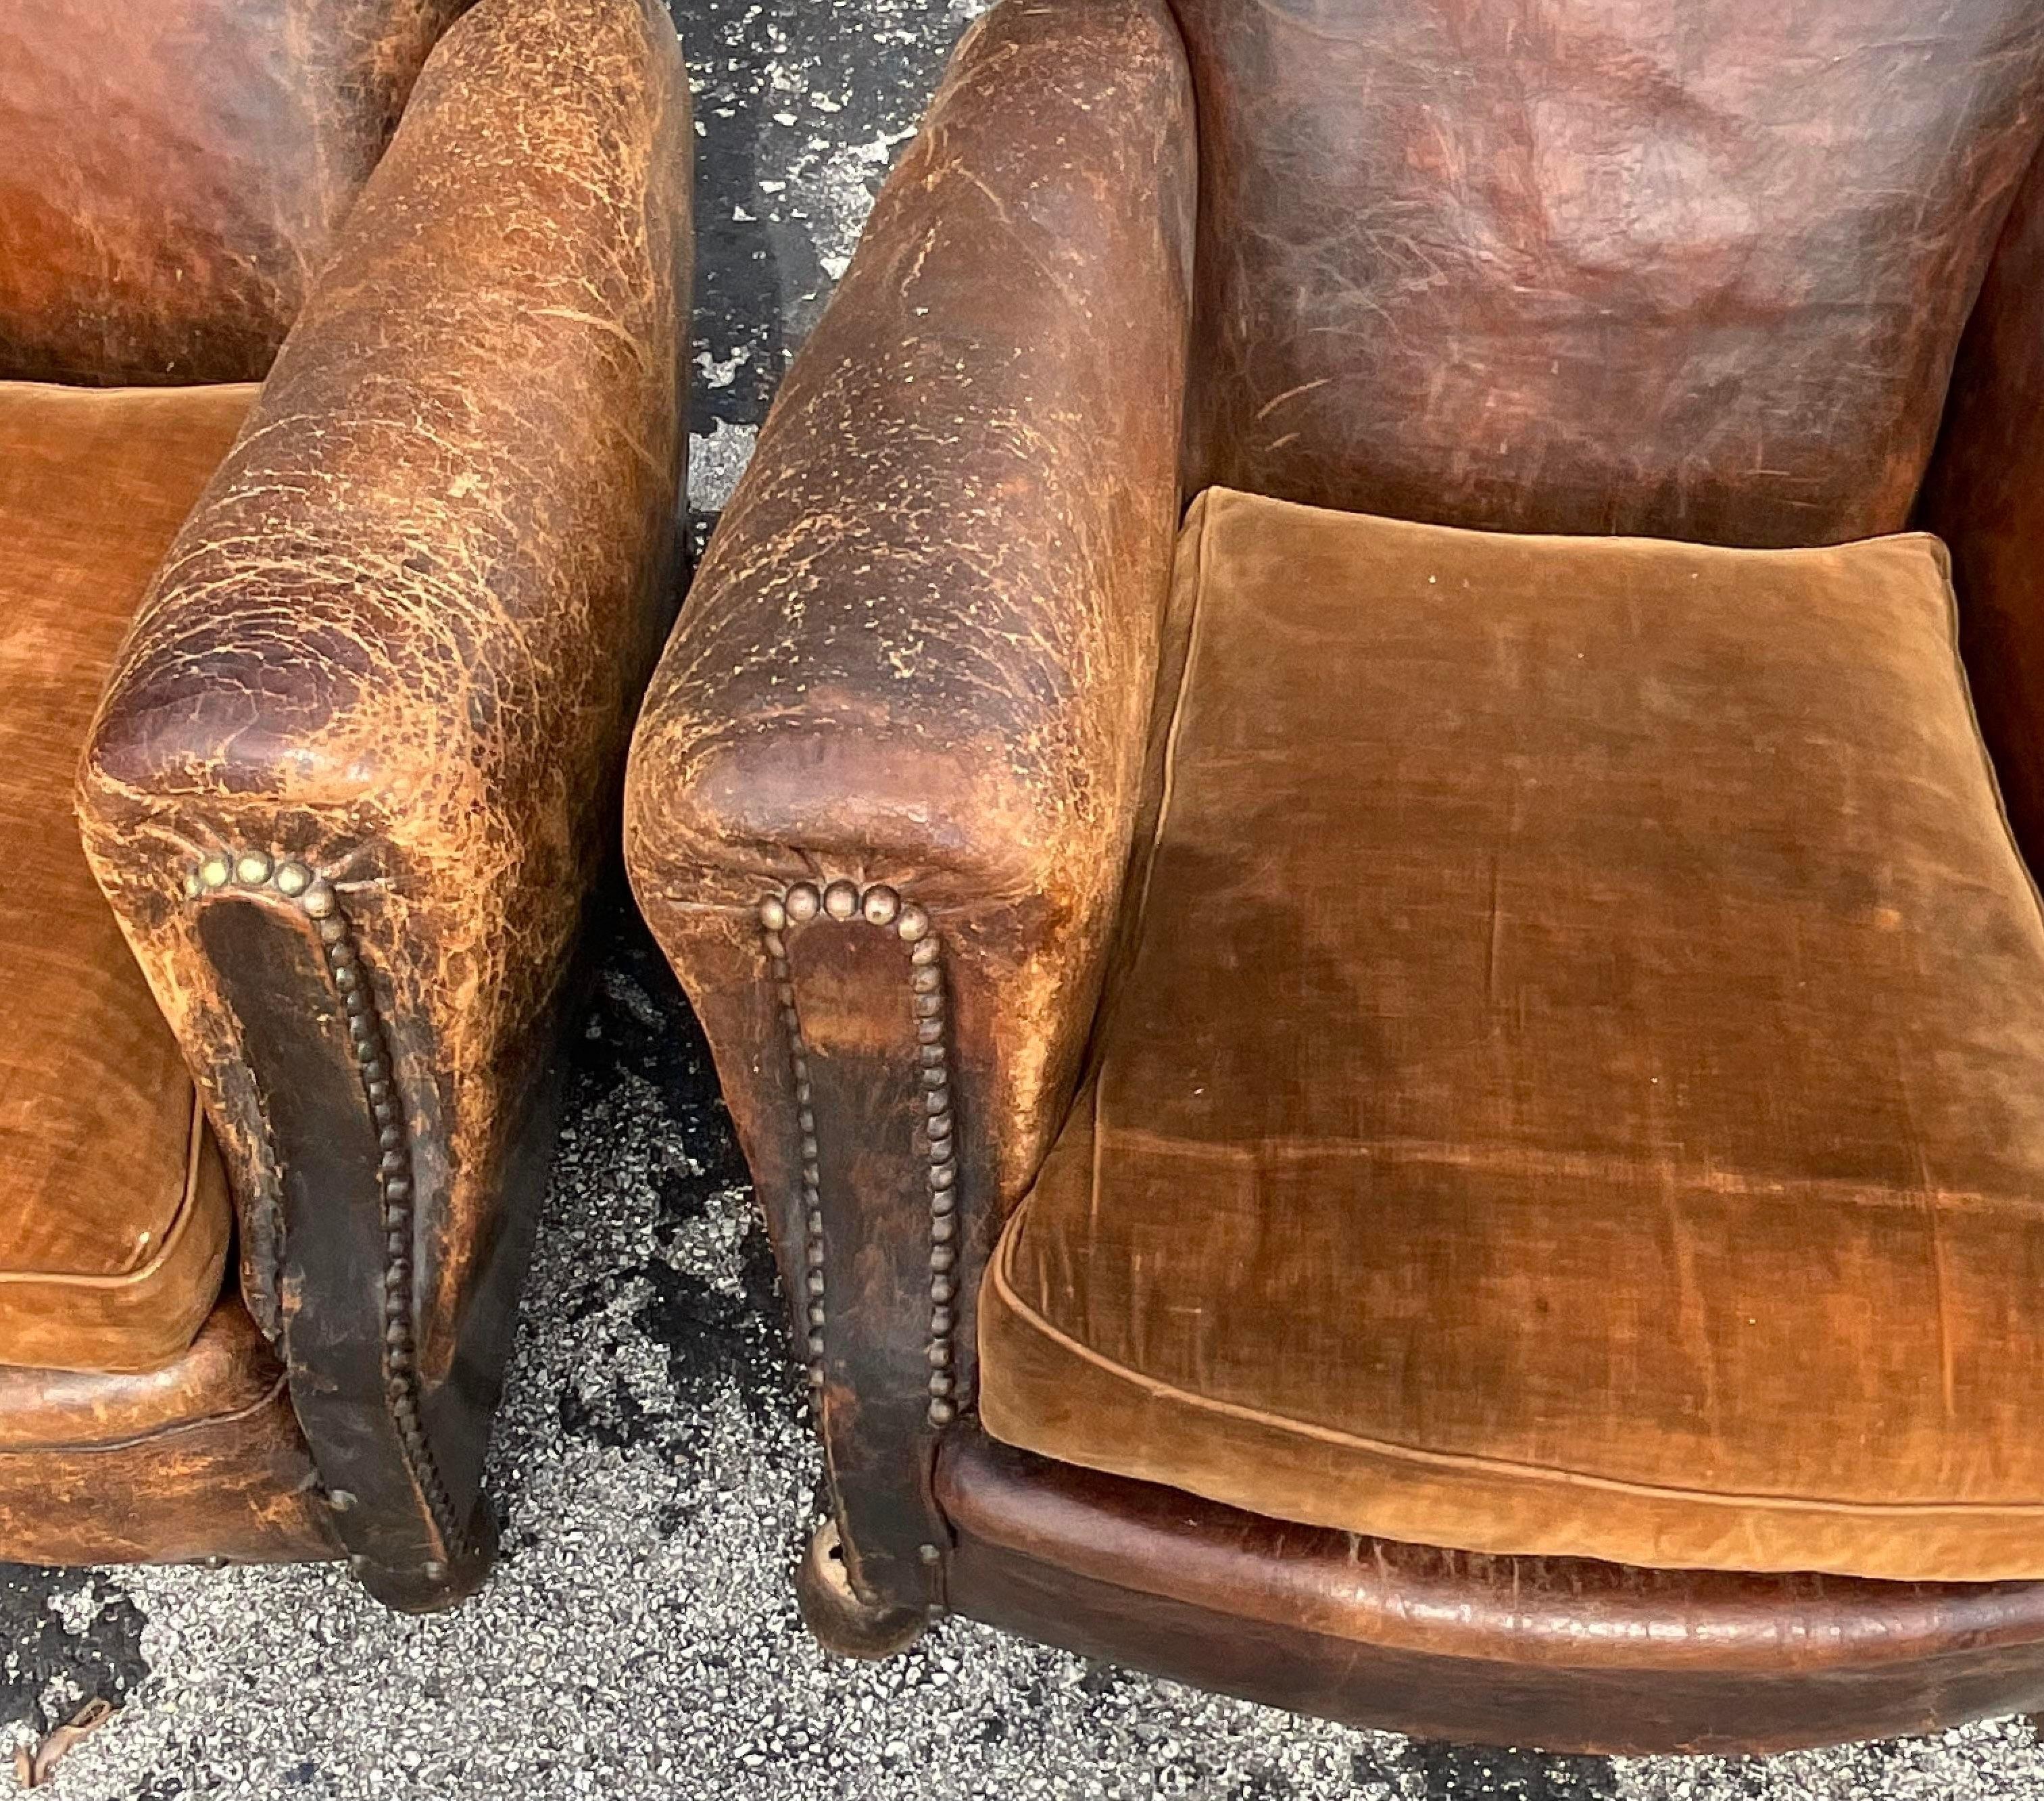 Vintage Boho Distressed French Art Deco Leather Club Chairs - a Pair For Sale 2